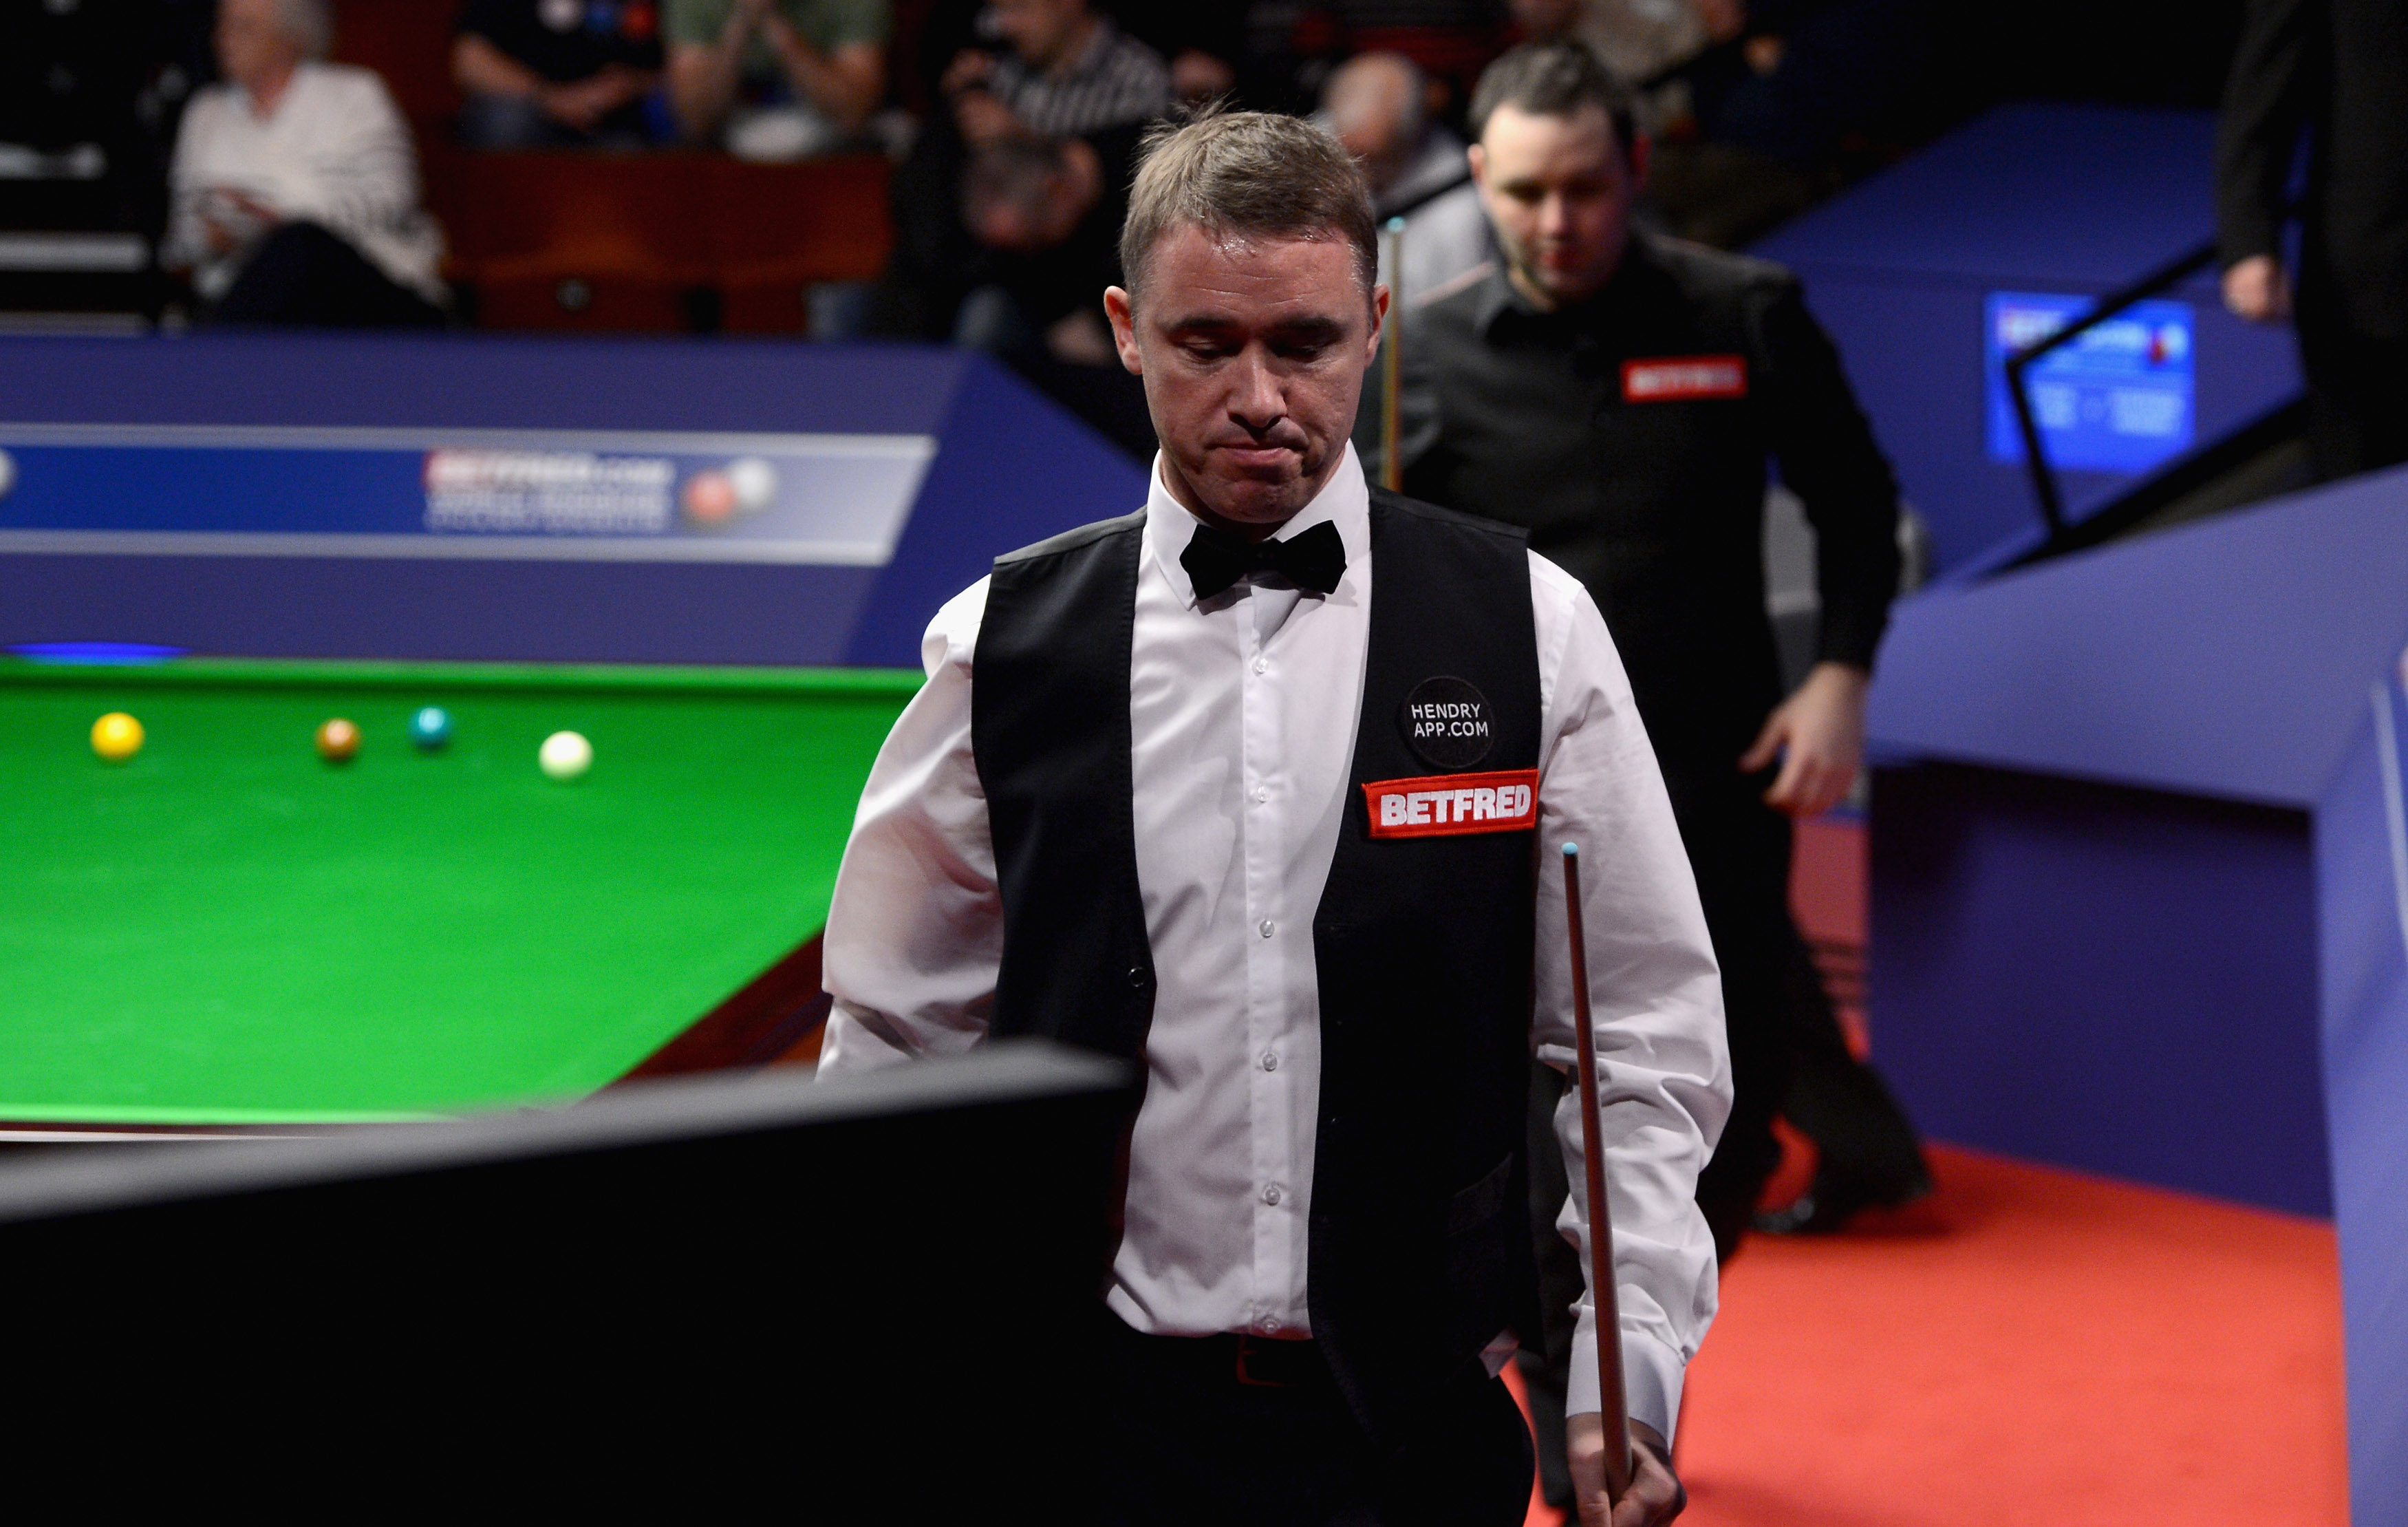 World Snooker Championship qualifying Stephen Hendry thrashed in 6-1 defeat to Chinas Xu Si